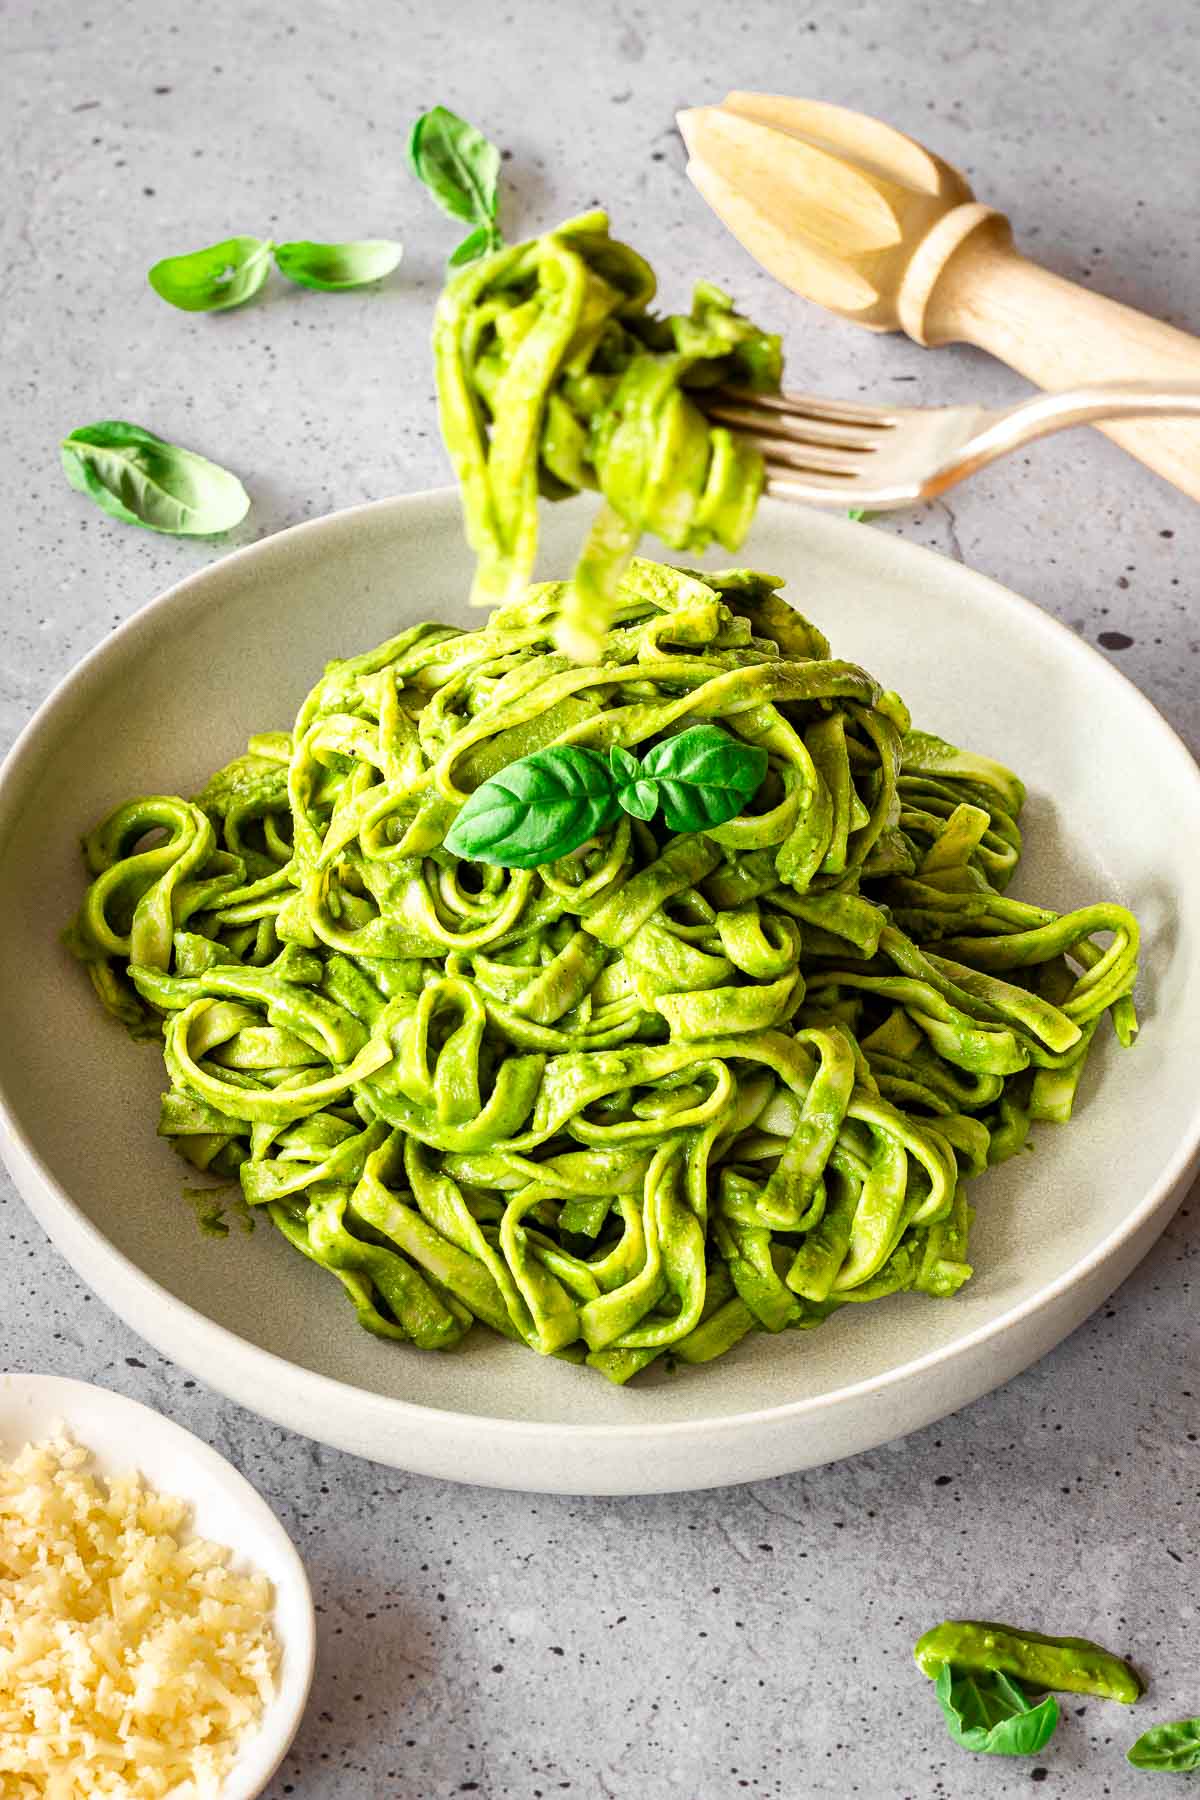 Grey plate of creamy spinach pasta sauce on fettuccine. Dish is decorated with basil leaves and there is a fork of pasta in the foreground.